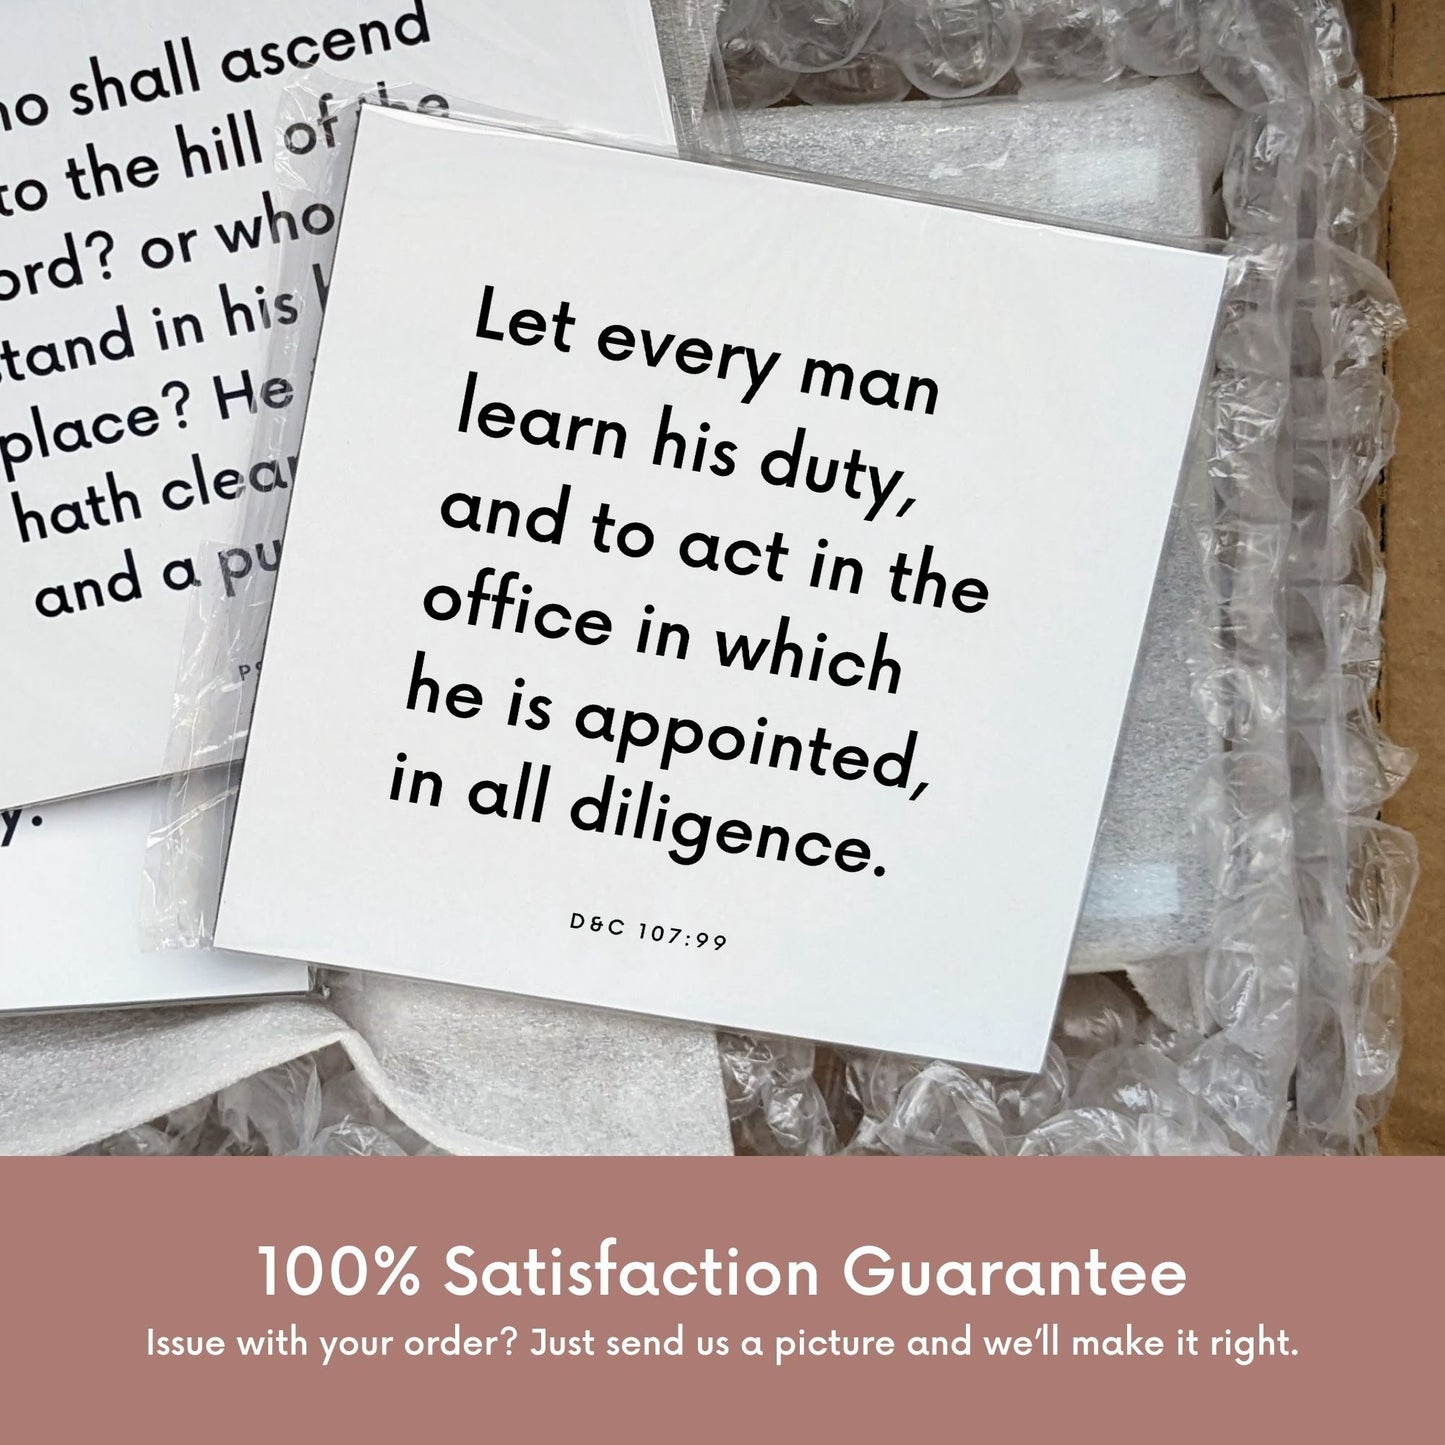 Shipping materials for scripture tile of D&C 107:99 - "Let every man learn his duty"